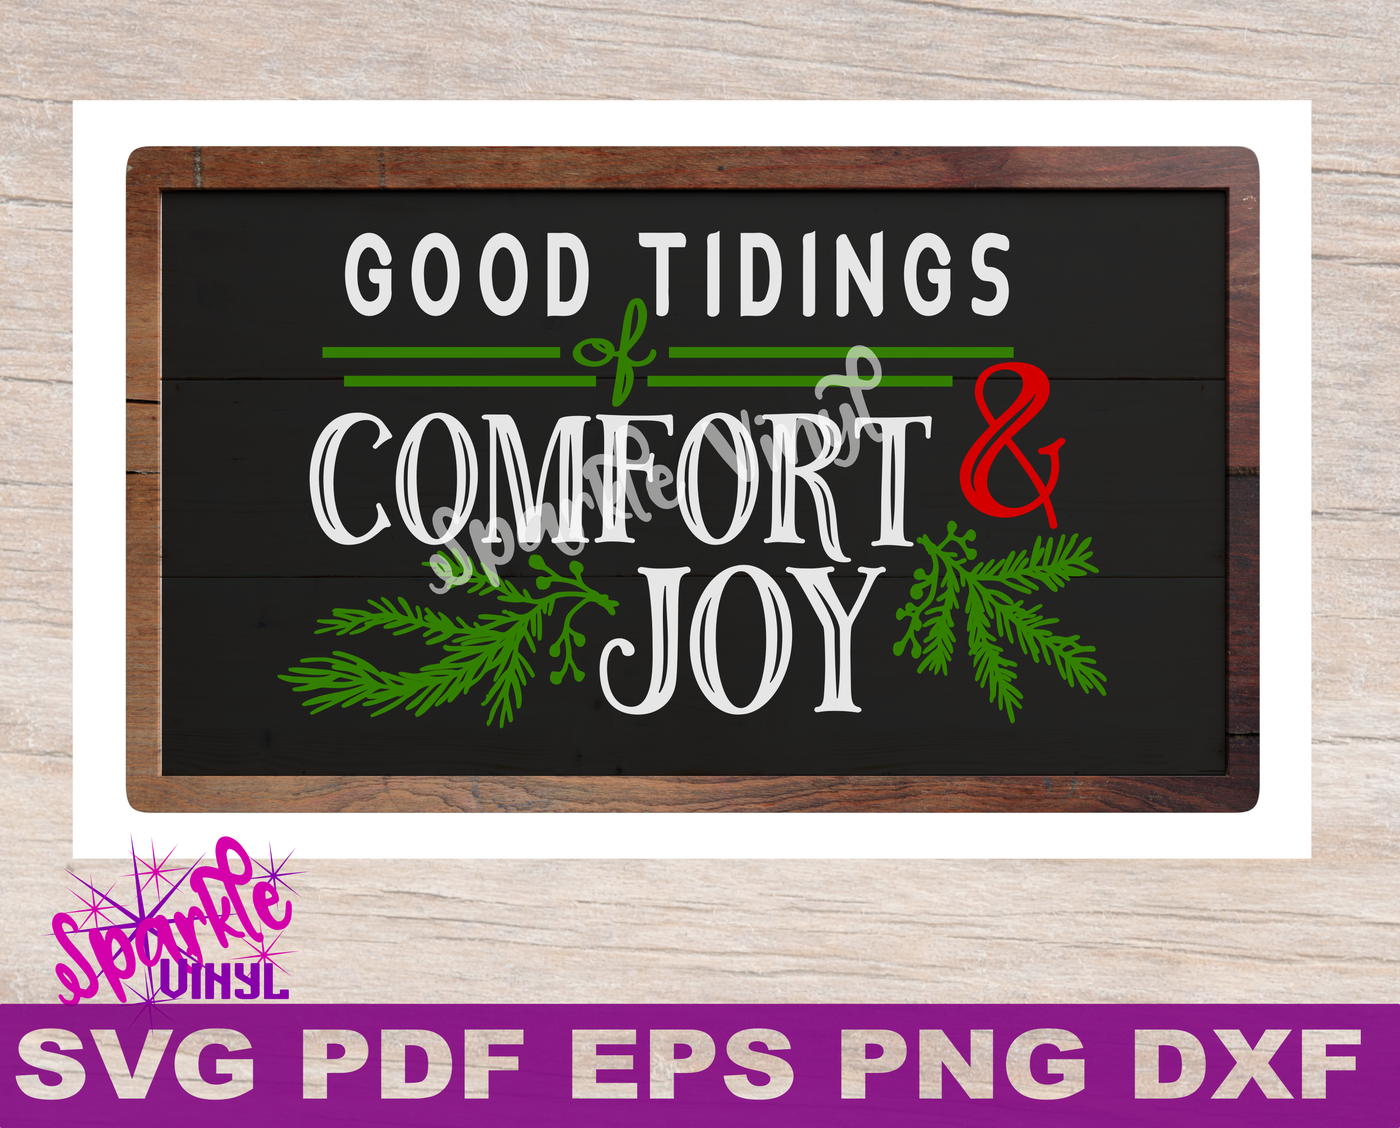 ori 107454 e60c0b74f54c78b73f776e0330d901676c1e2869 svg christmas comfort and joy diy sign stencil farmhouse style printable or svg cutting files for cricut sihouette